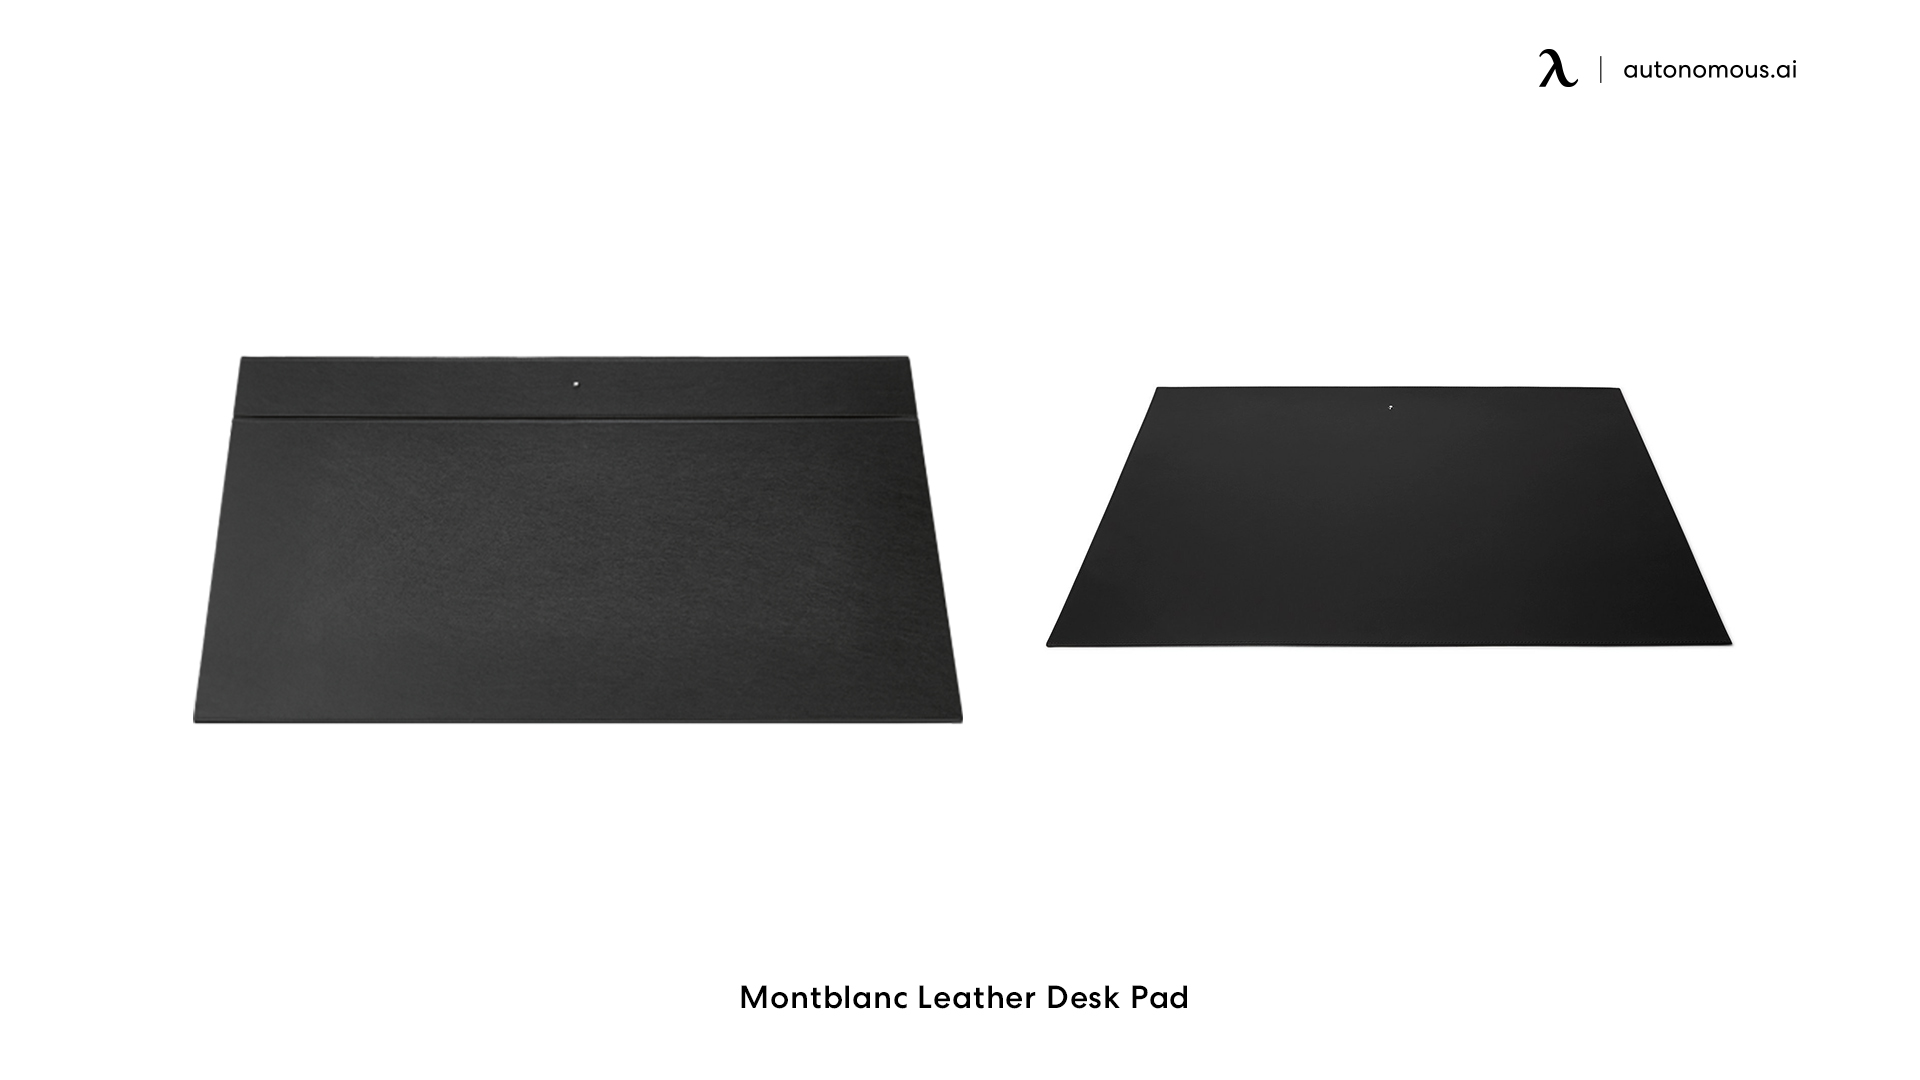 Montblanc Leather desk mat for keyboard and mouse